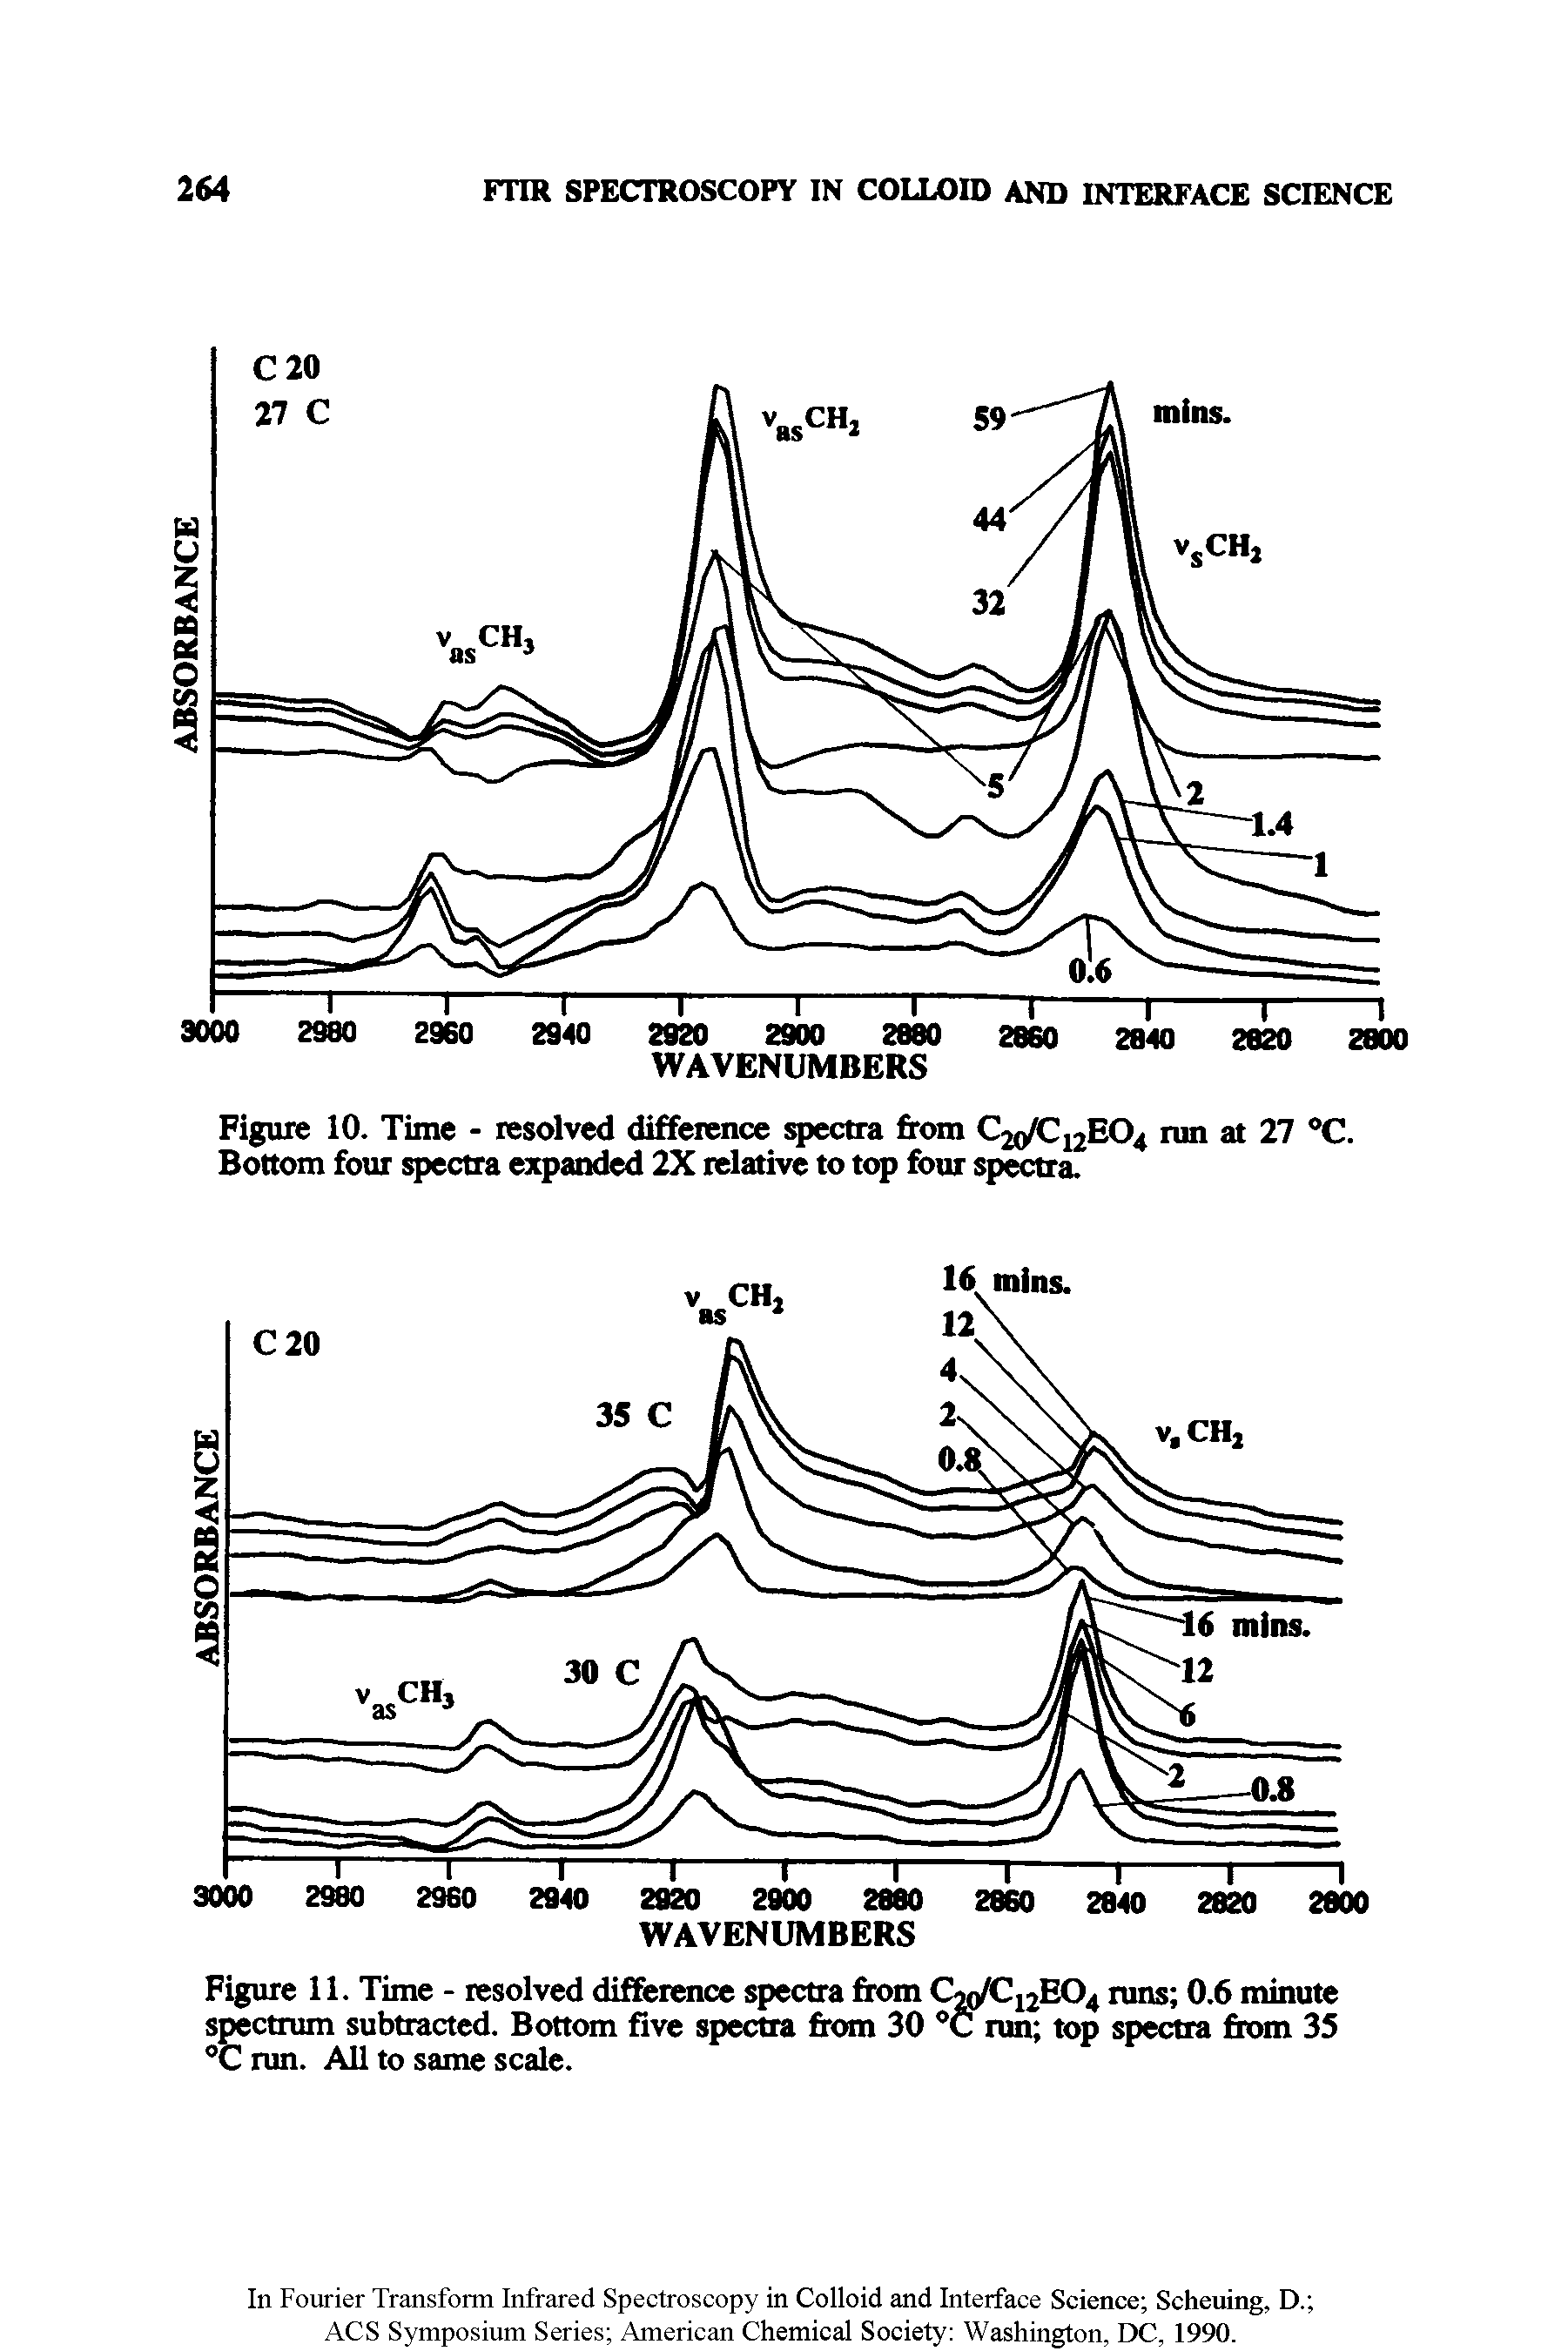 Figure 10. Time - resolved difference spectra from Ca/C EO run at 27 °C. Bottom four spectra expanded 2X relative to top four spectra.